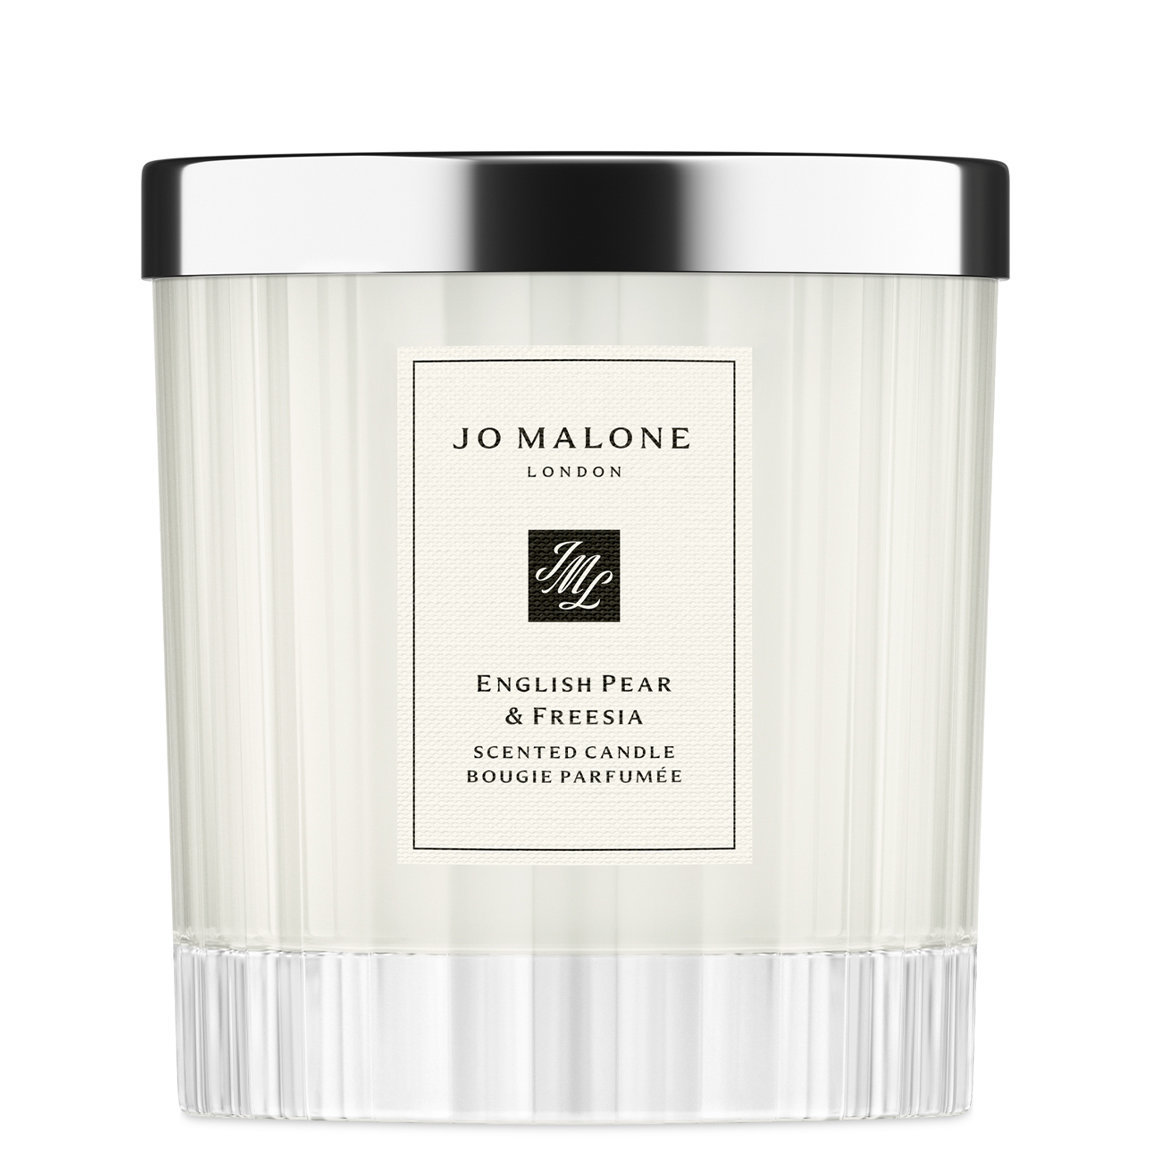 Jo Malone London English Pear & Freesia Deco Candle alternative view 1 - product swatch.